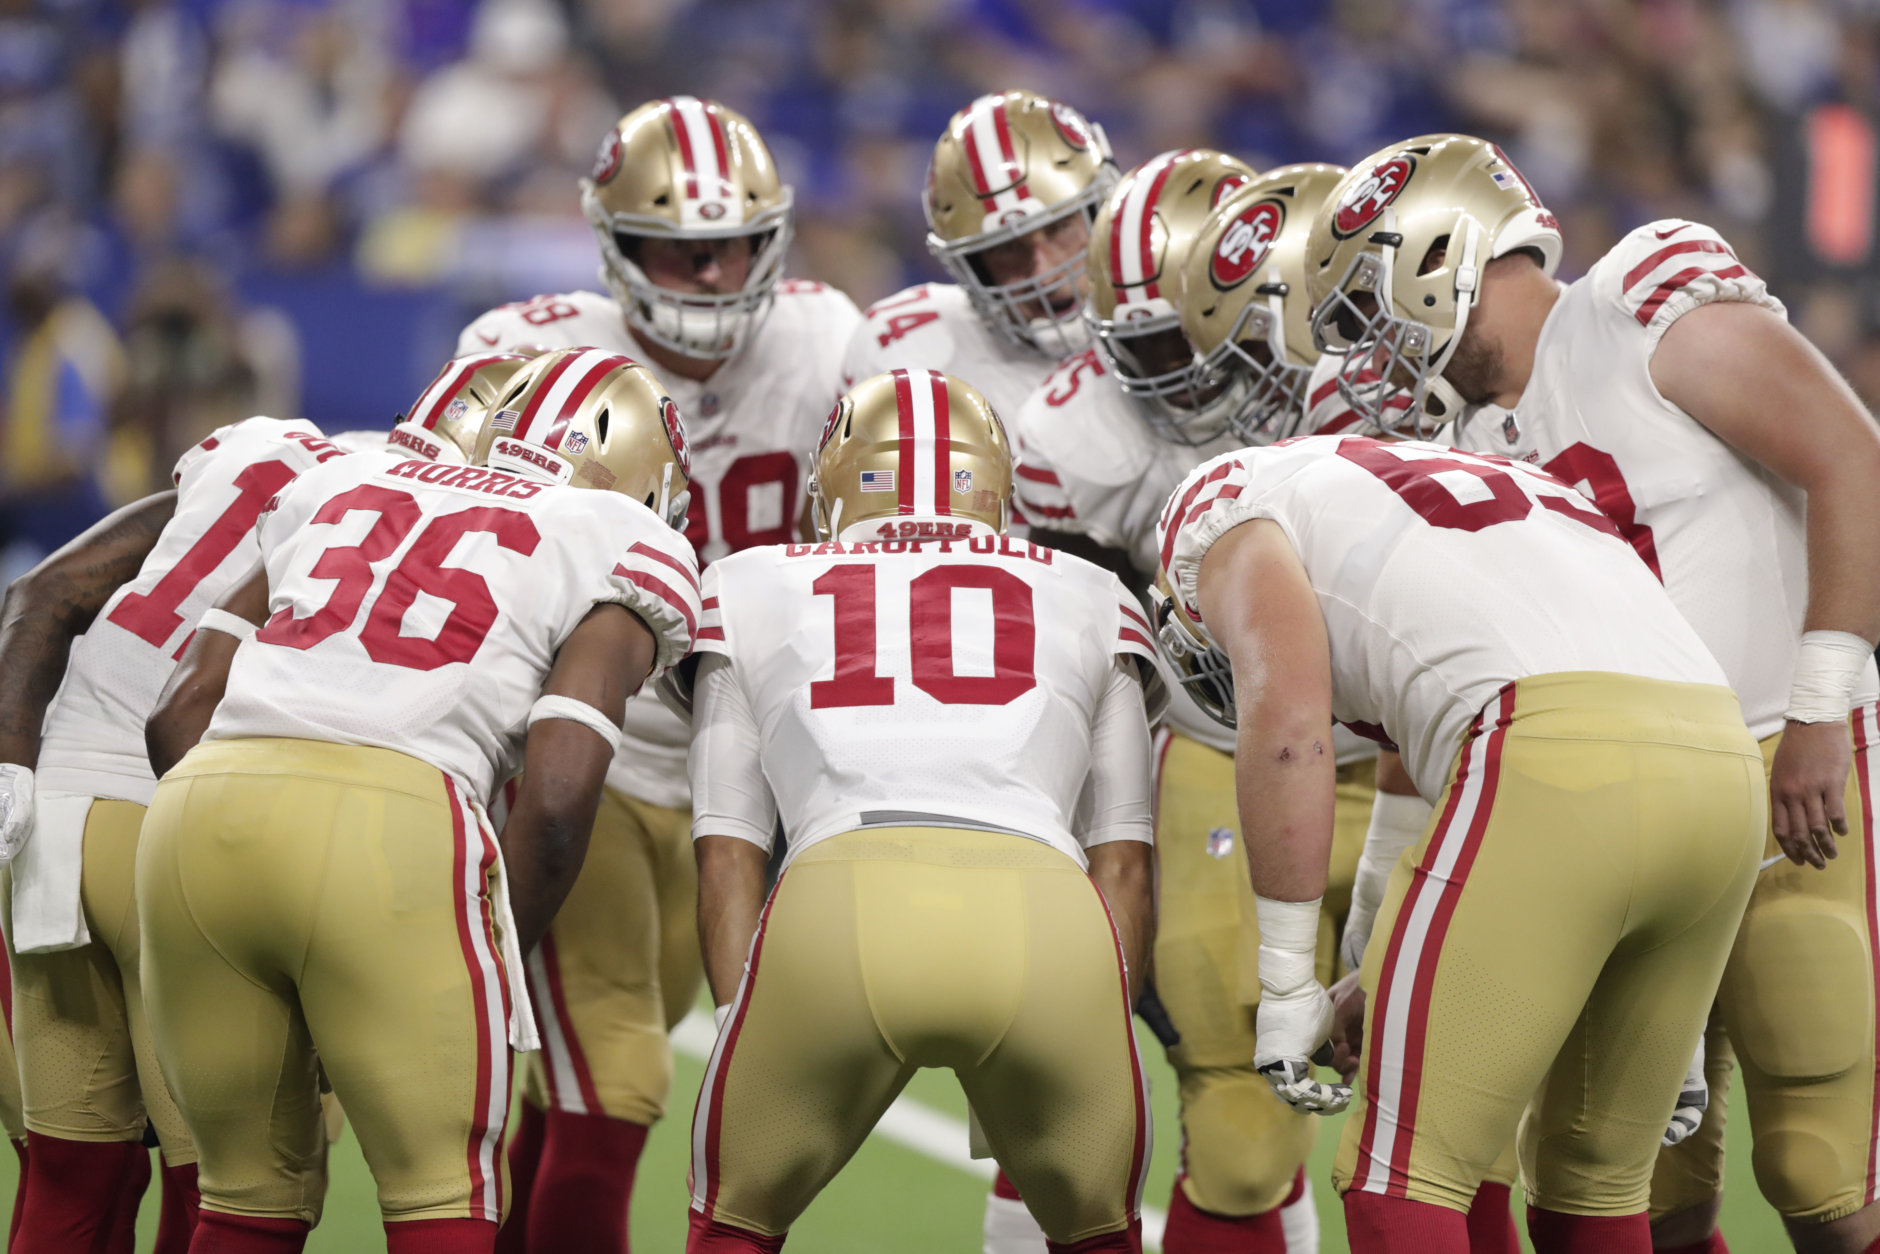 San Francisco 49ers quarterback Jimmy Garoppolo (10) huddles his offense during the first half of an NFL preseason football game against the Indianapolis Colts in Indianapolis, Saturday, Aug. 25, 2018. (AP Photo/Michael Conroy)